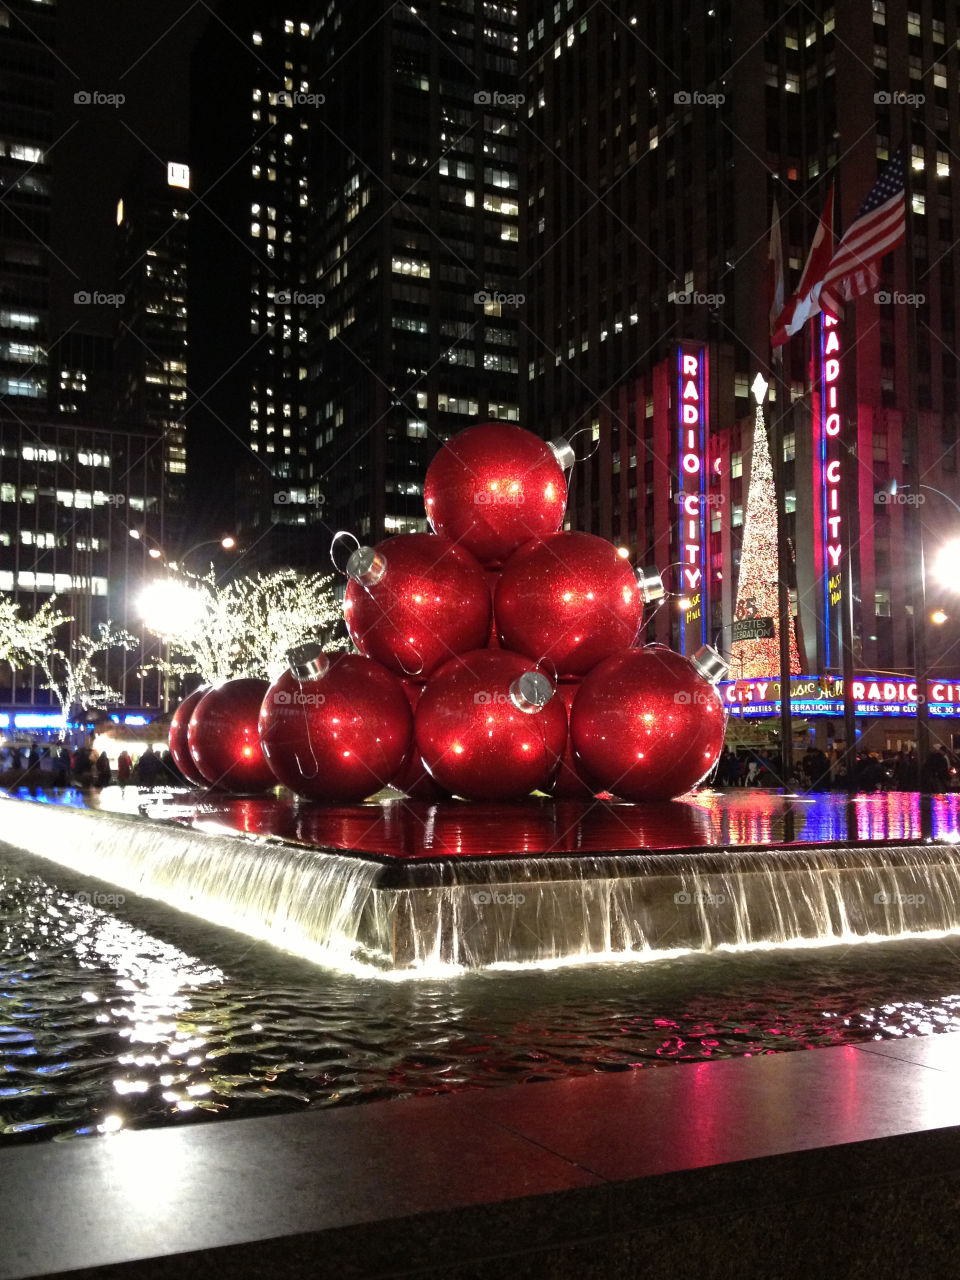 A pile of big red ornaments on a water fountain by Radio City Music Hall in New York City at Christmas time